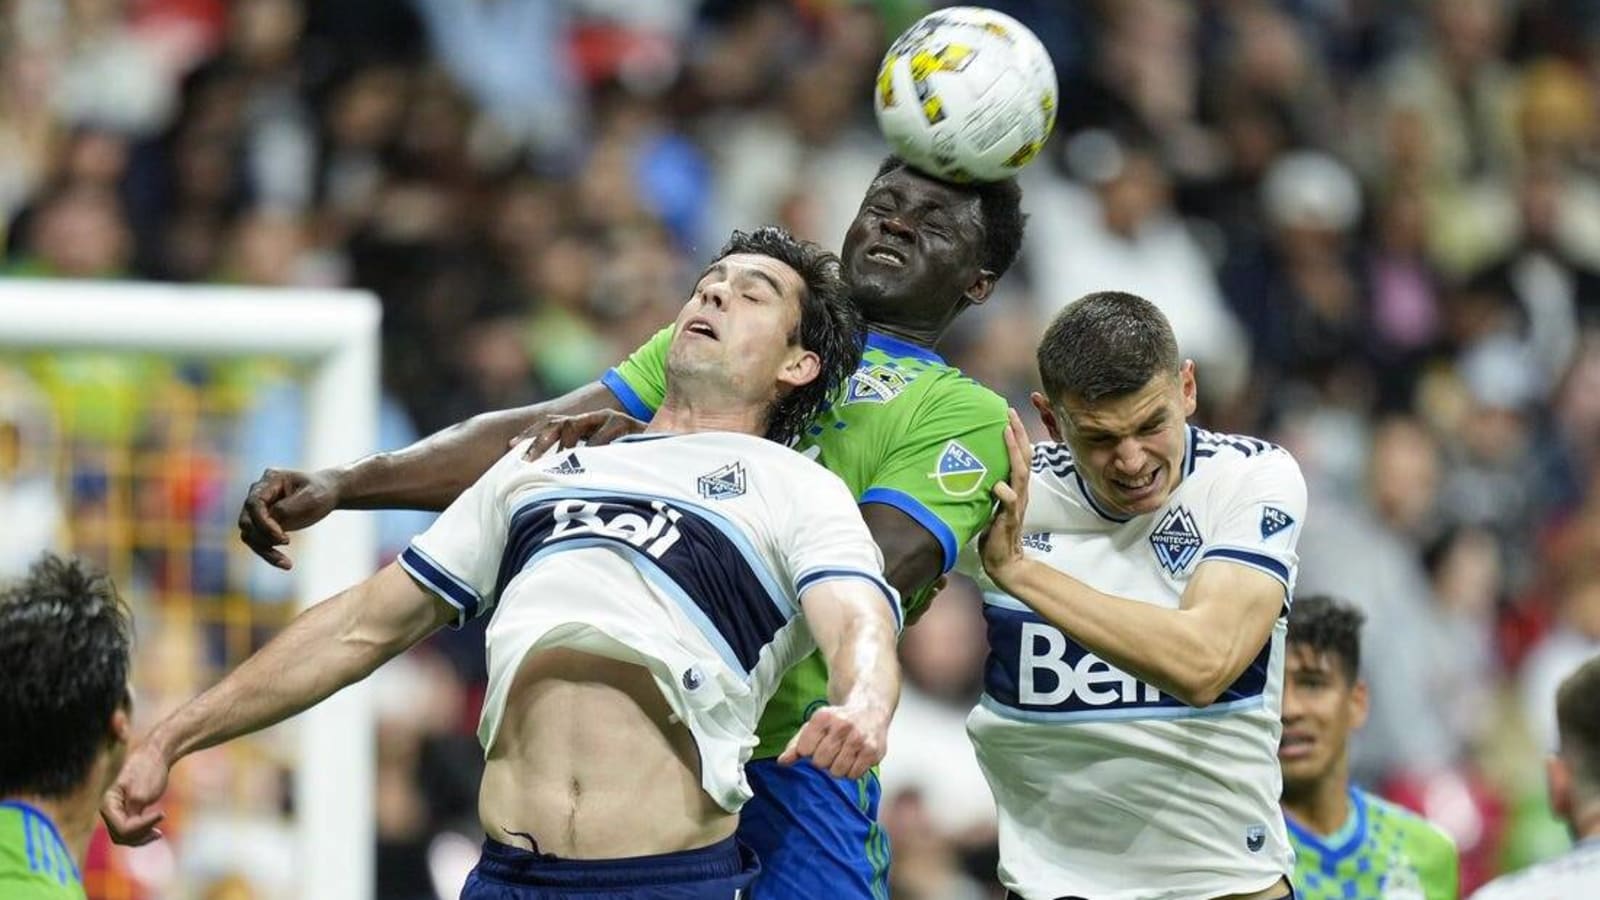 Whitecaps shooting for rare road win at Sounders